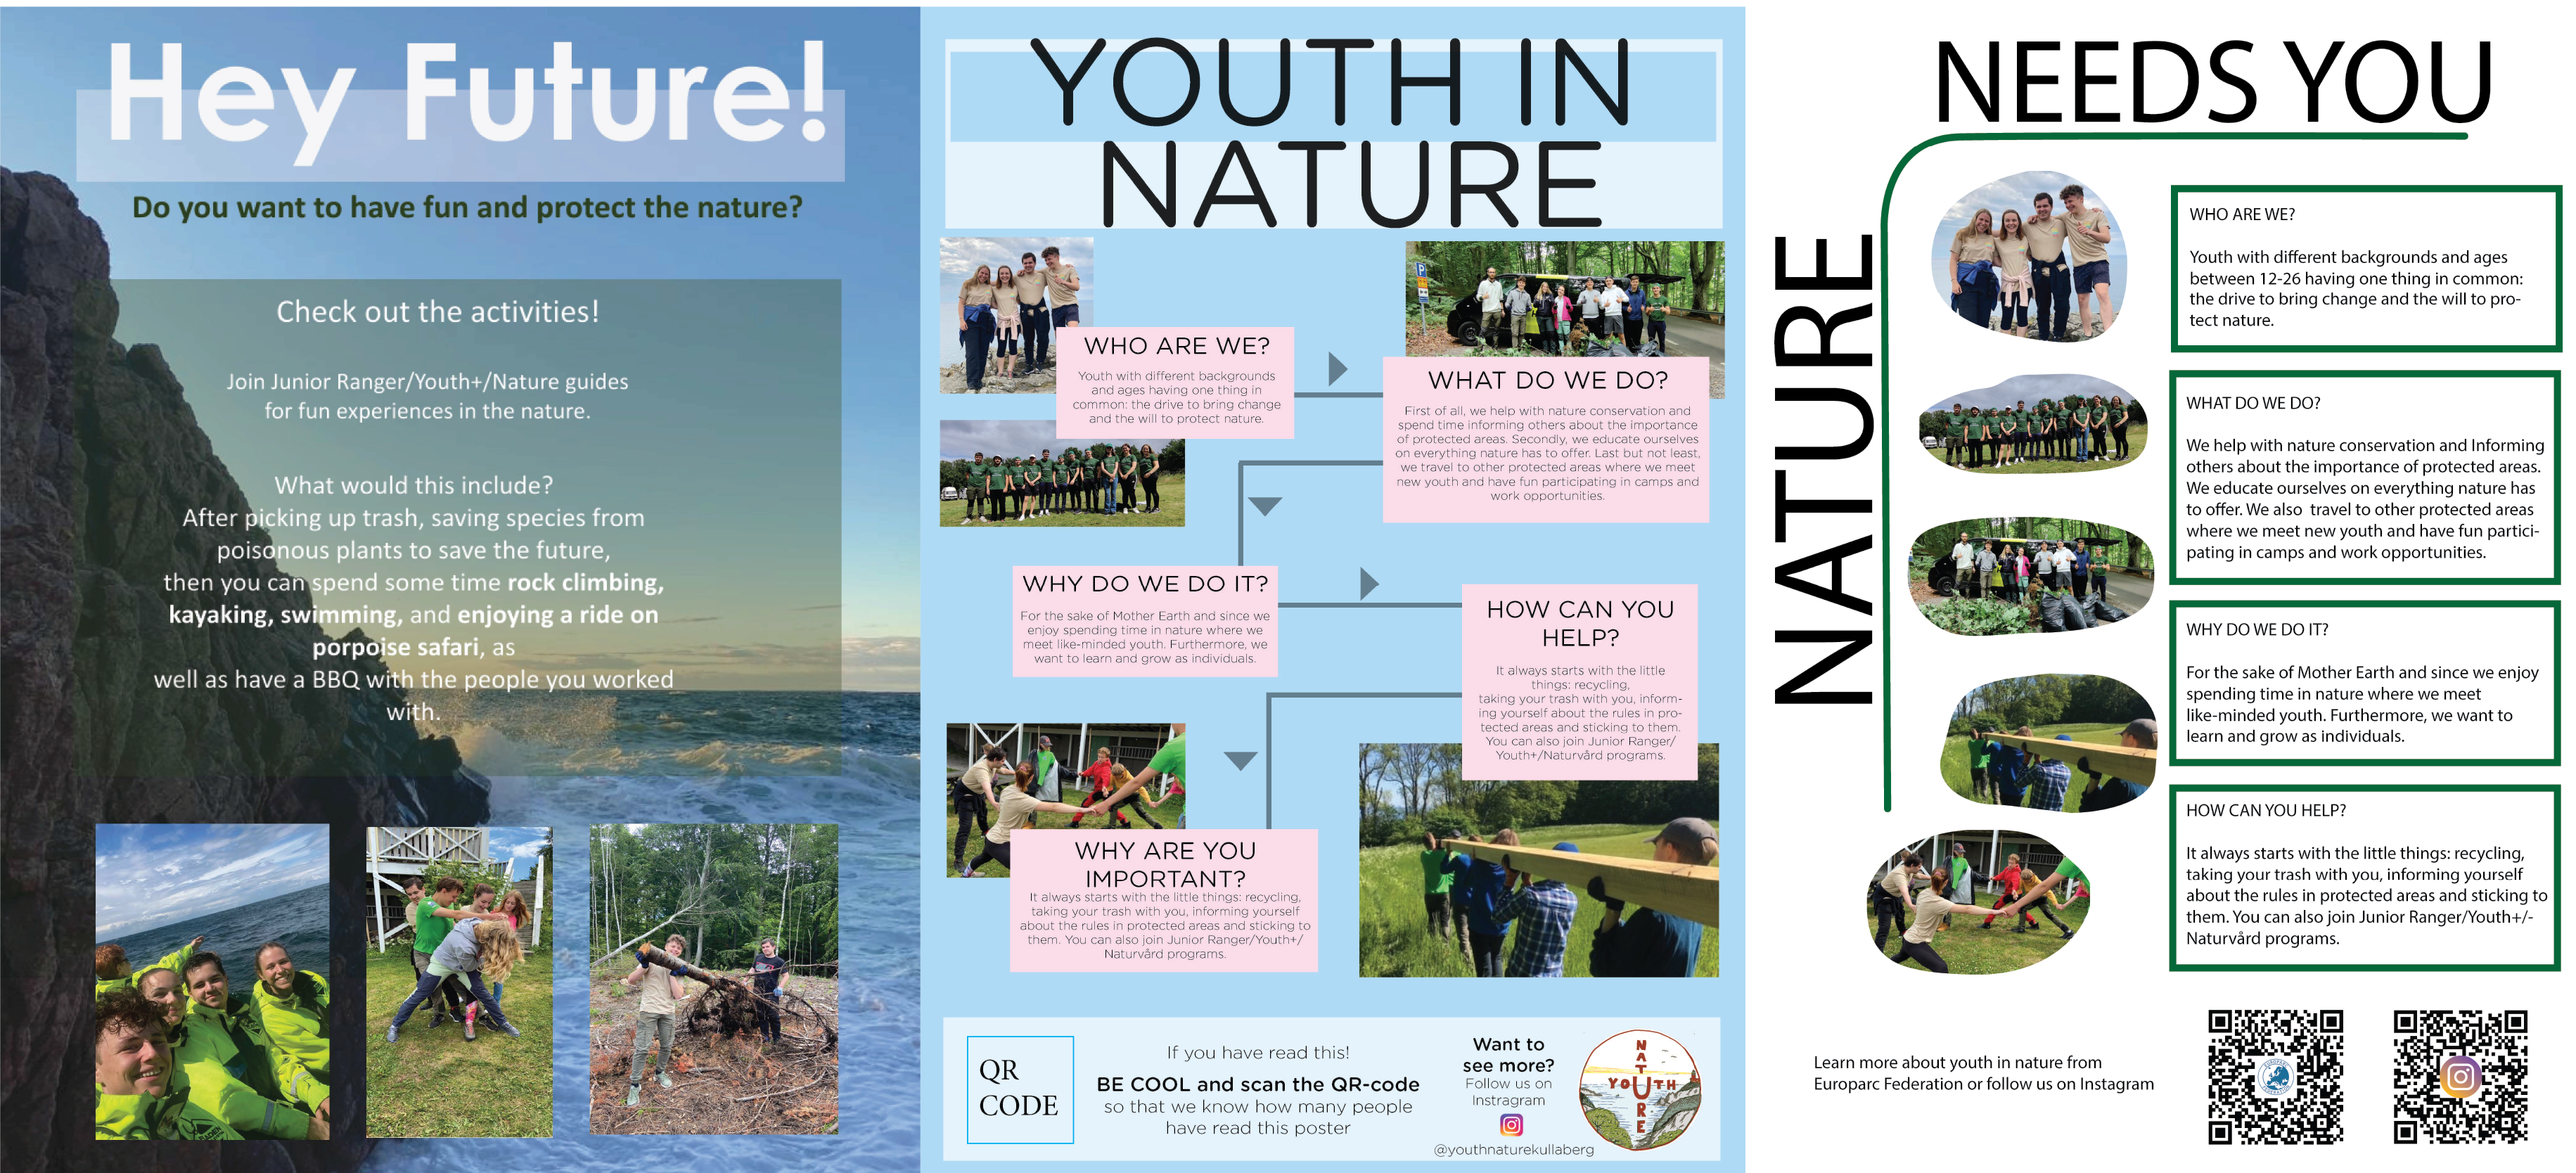 Advertising youth engagement in Kullaberg Nature Reserve 